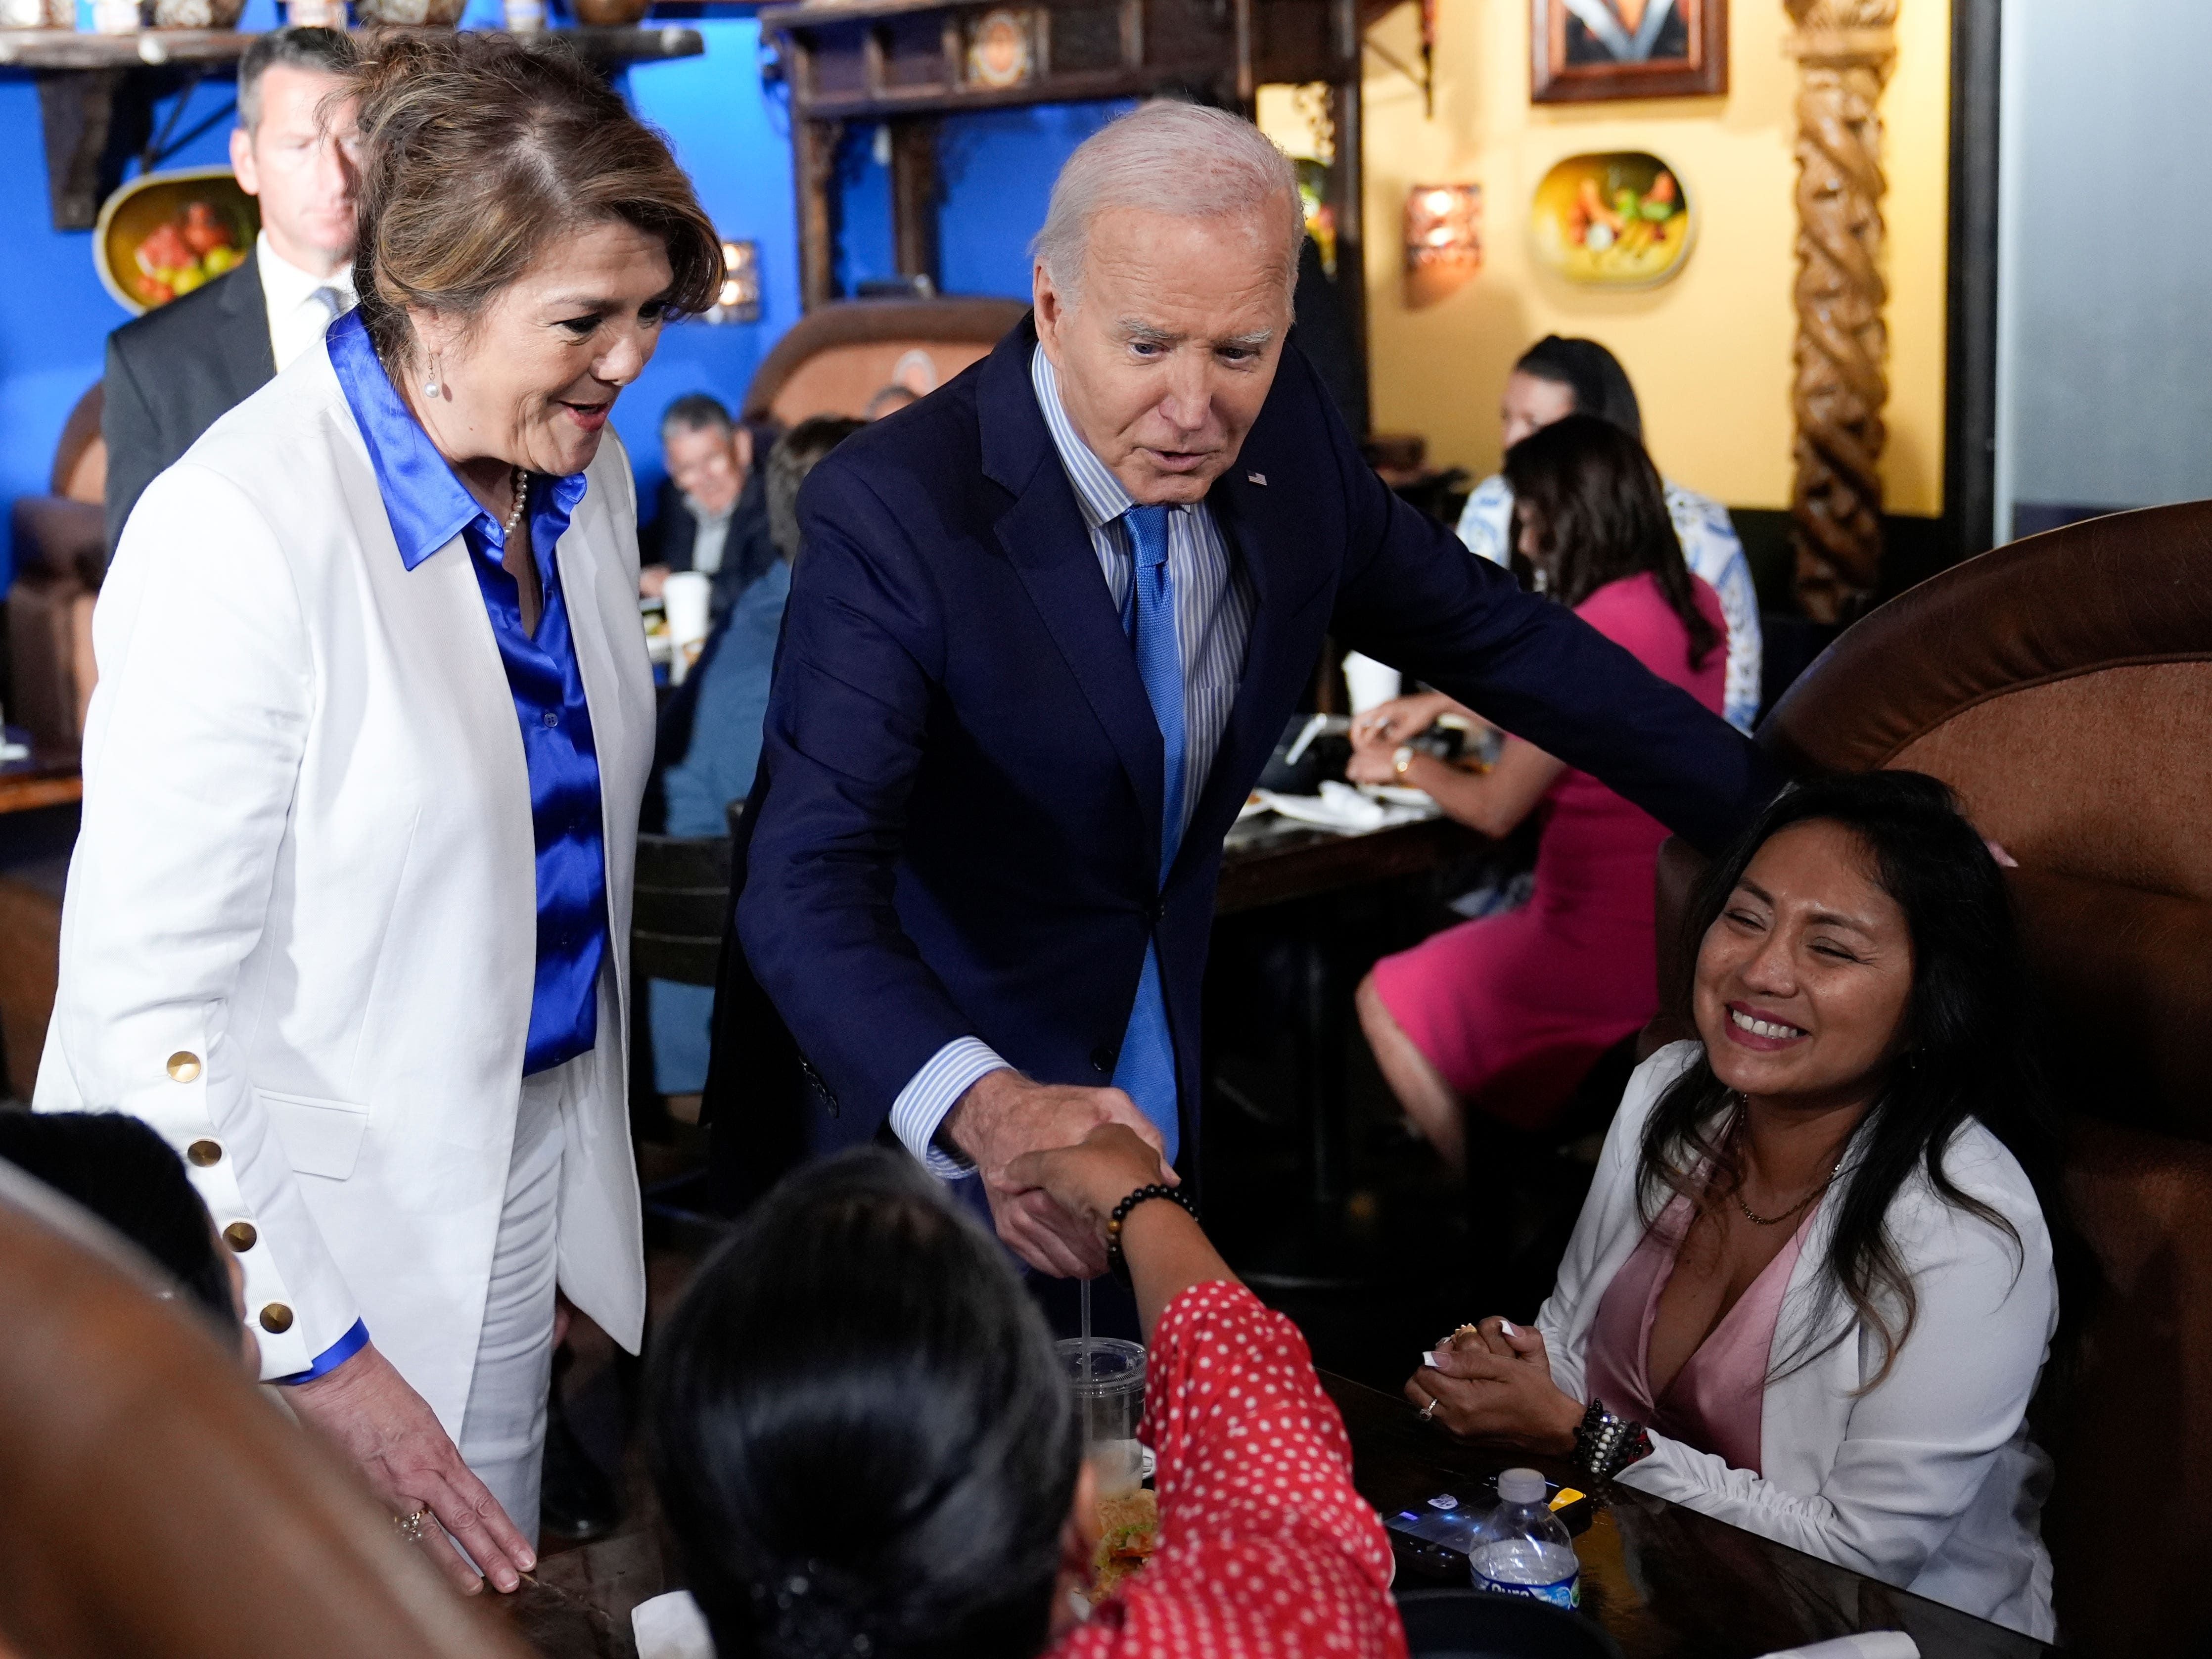 President Biden tests positive for Covid-19 while campaigning in Las Vegas